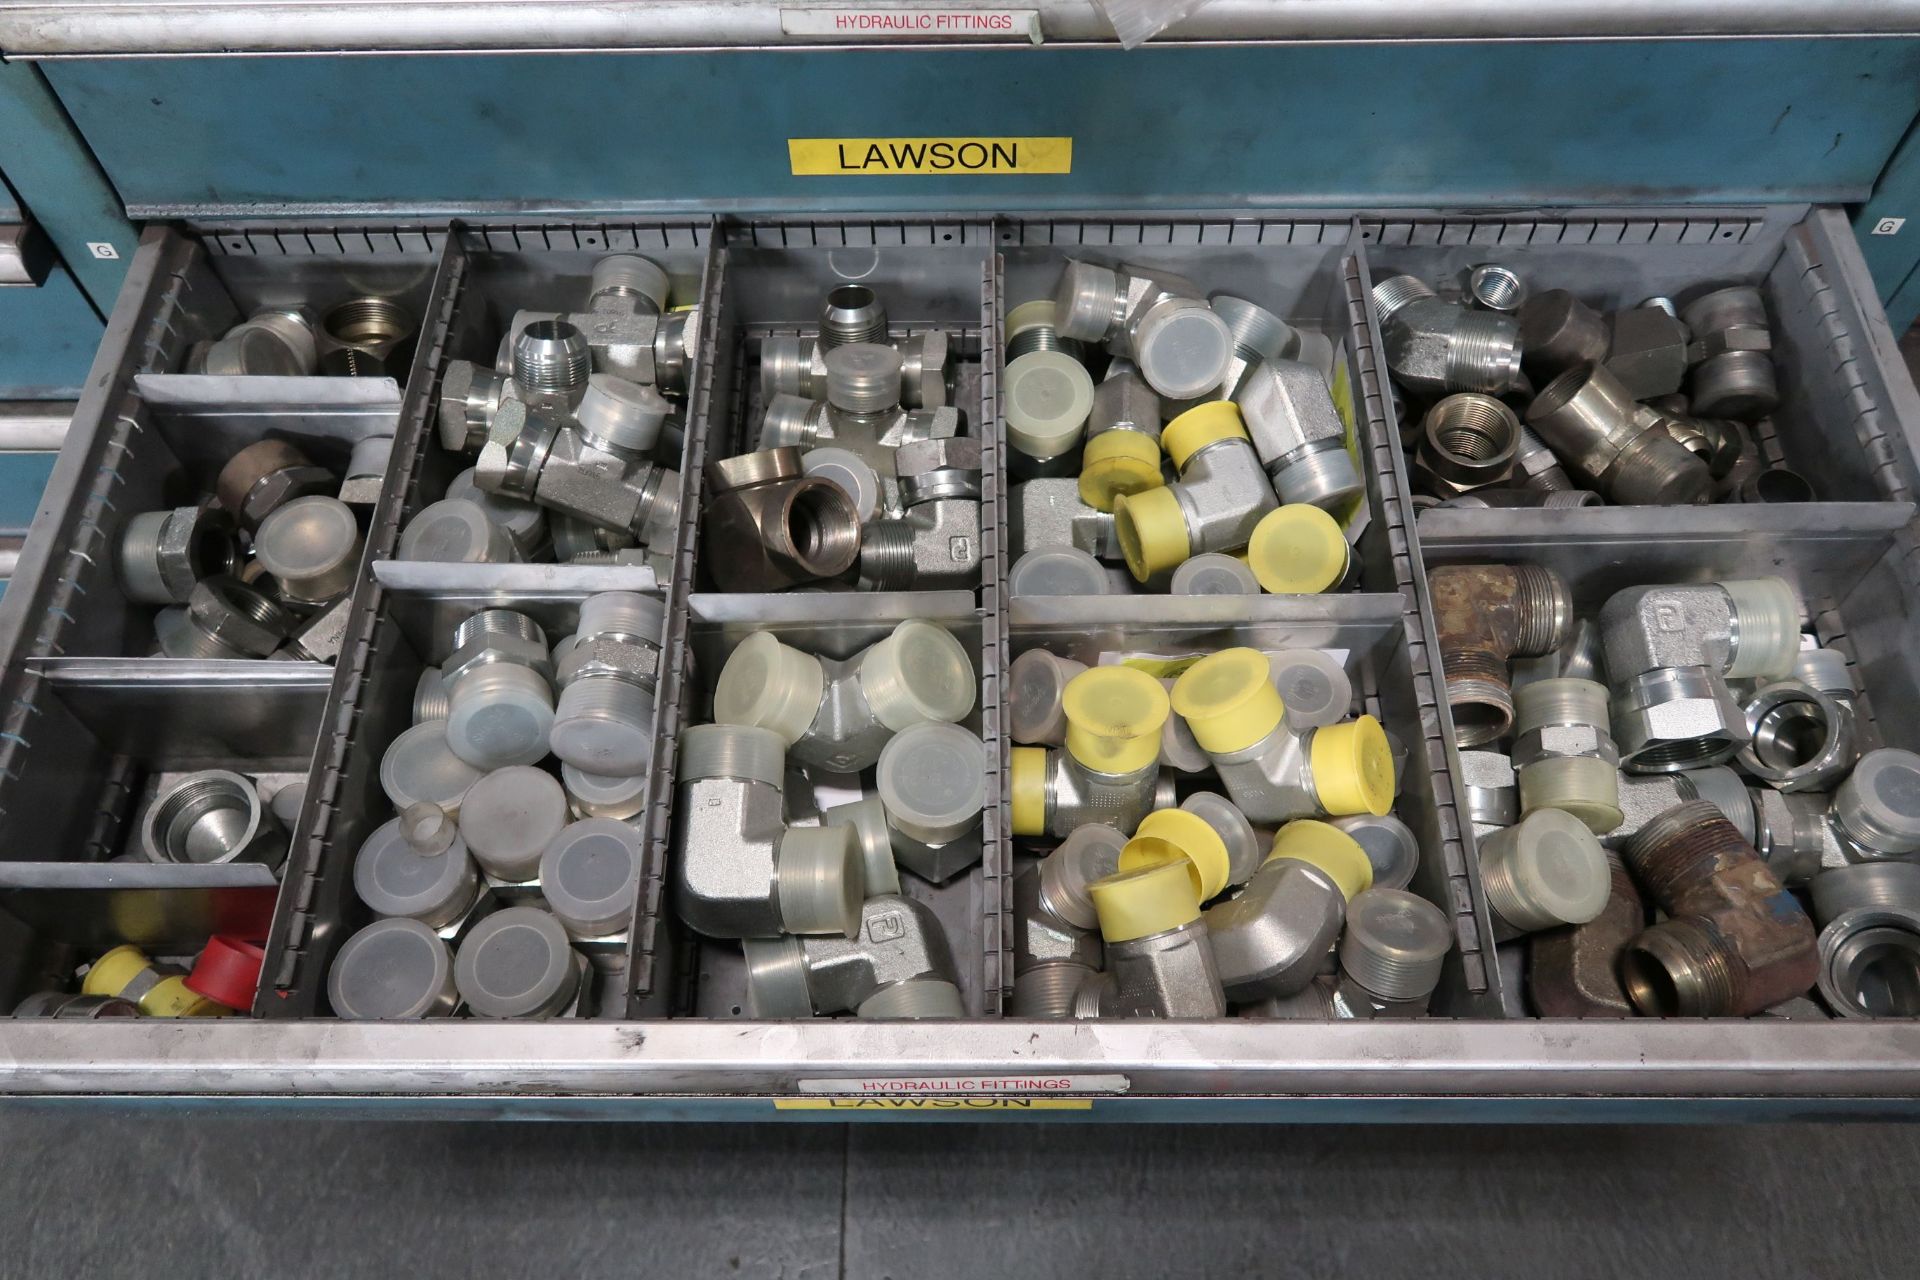 TOOLING CABINETS WITH CONTENTS - MOSTLY MACHINE PARTS **LOADING PRICE DUE TO ERRA - $2,000.00** - Image 5 of 59